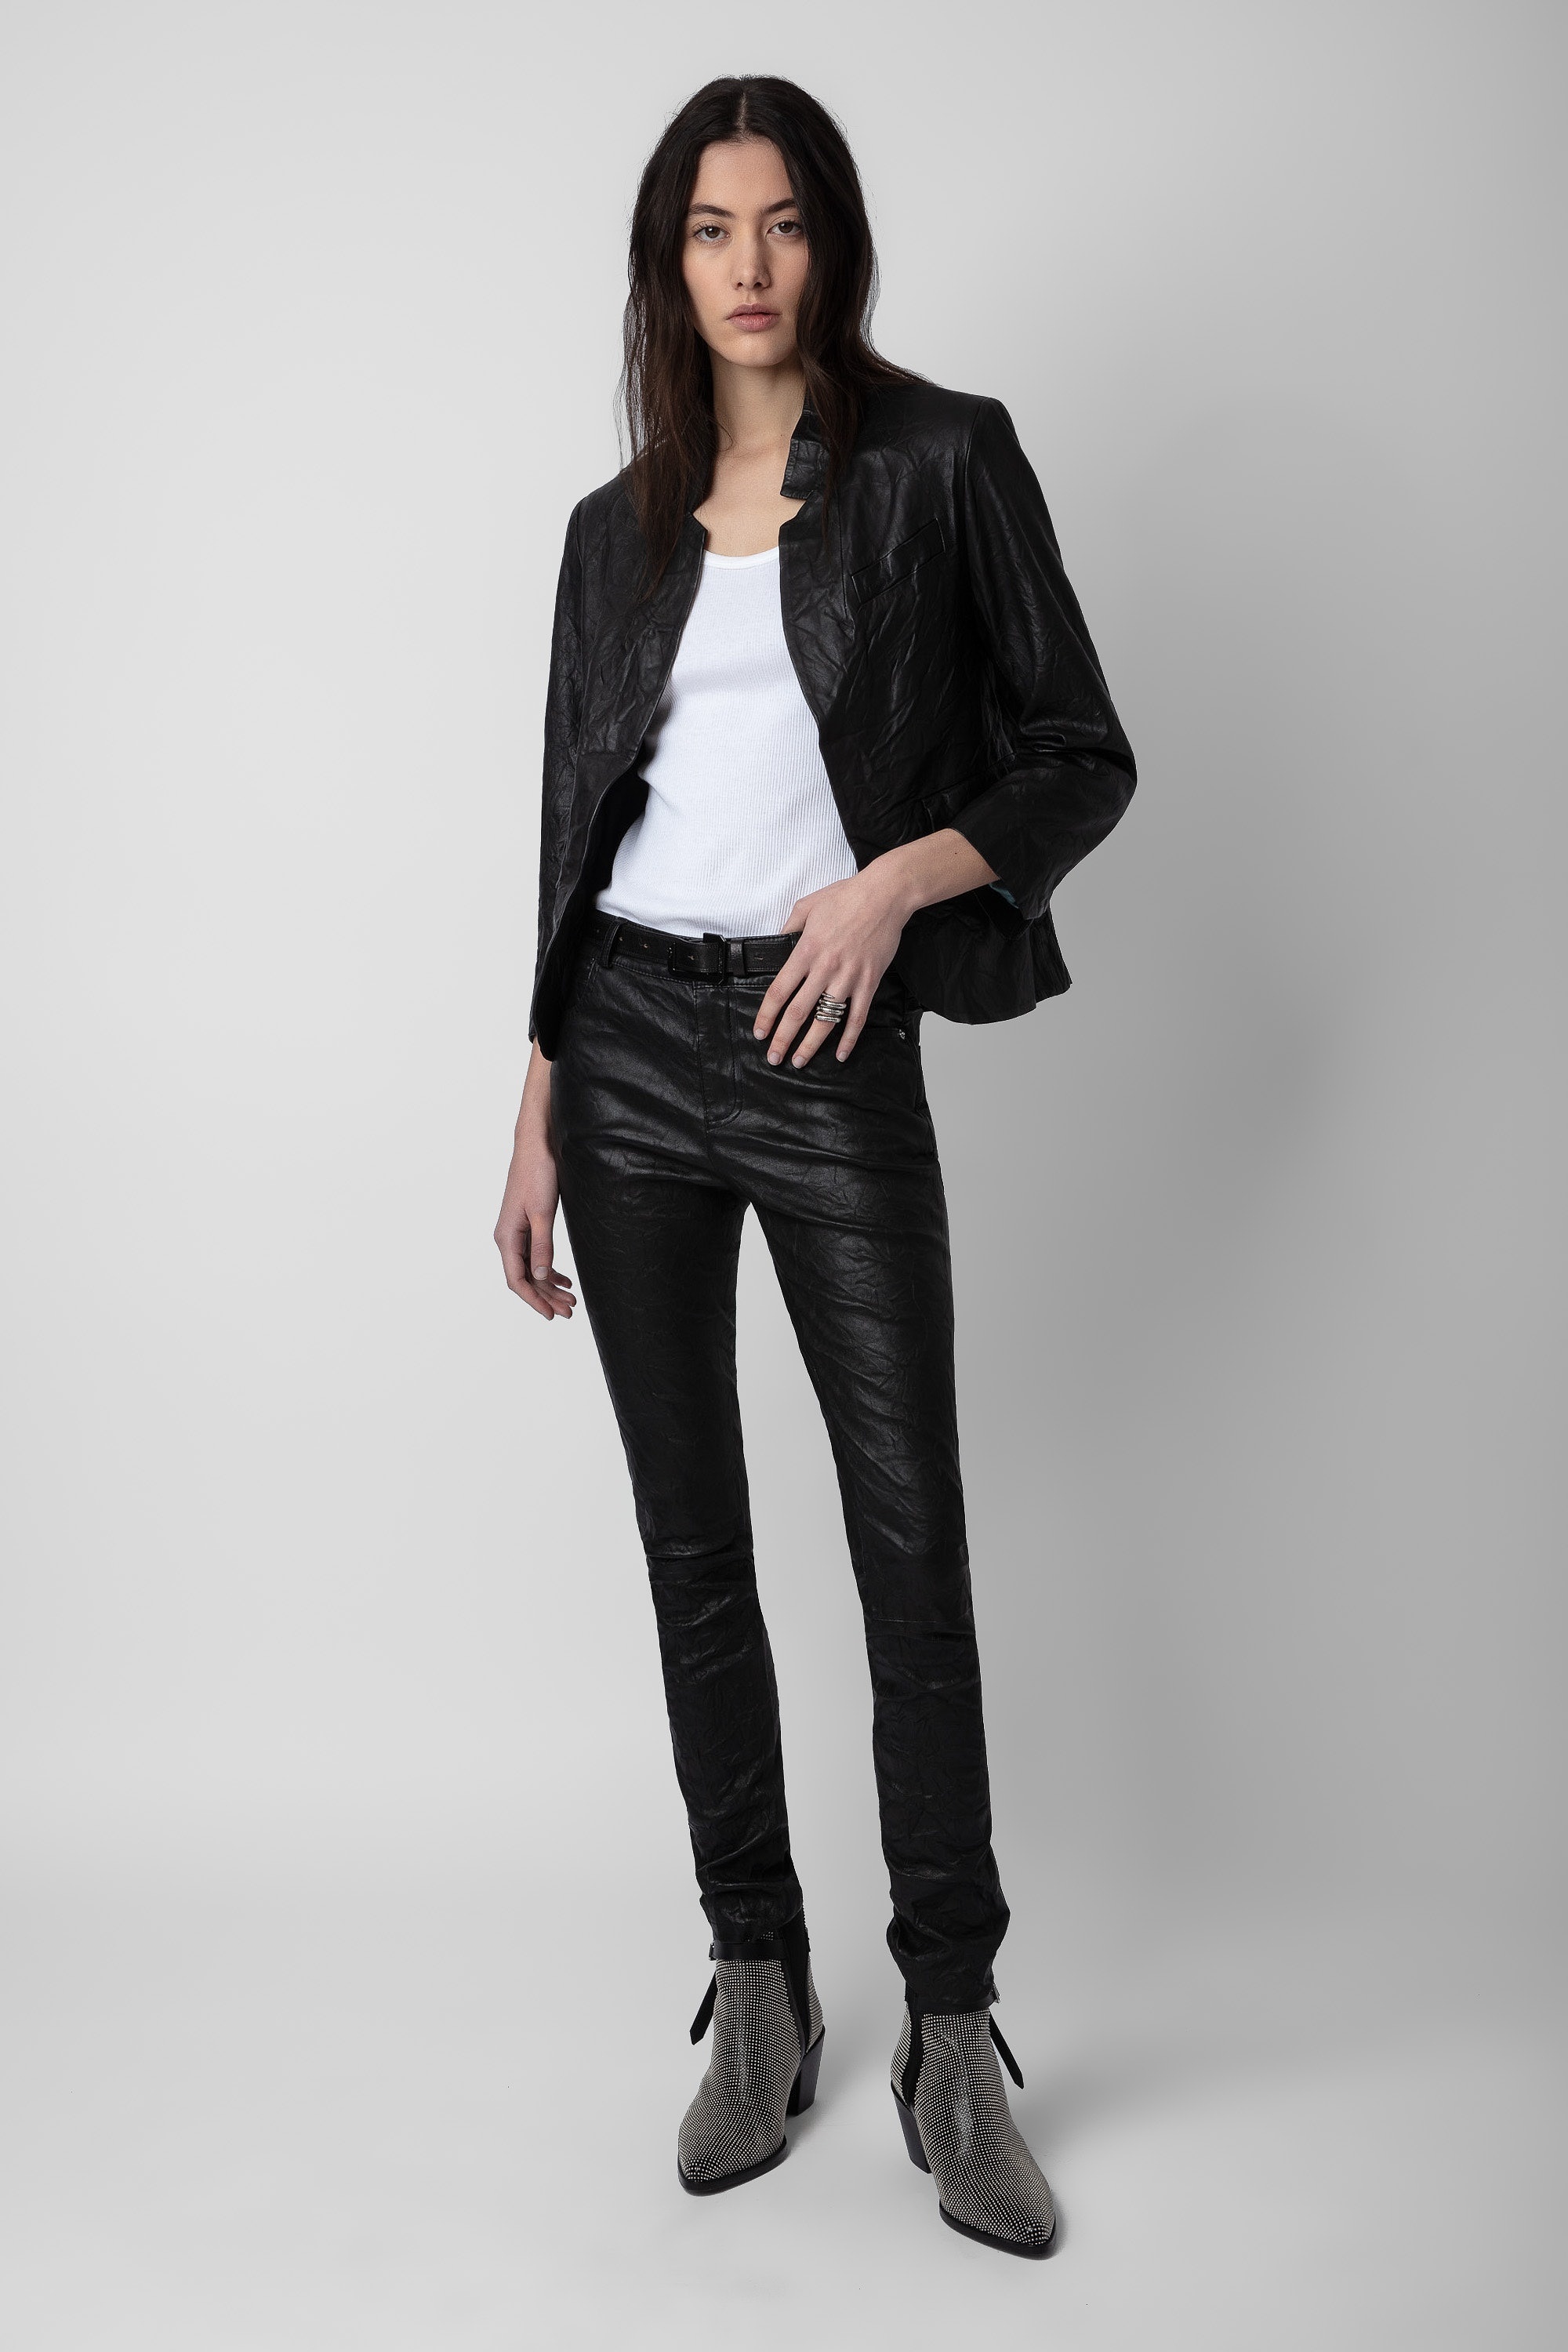 Phlame Crinkle Leather Pants - 2